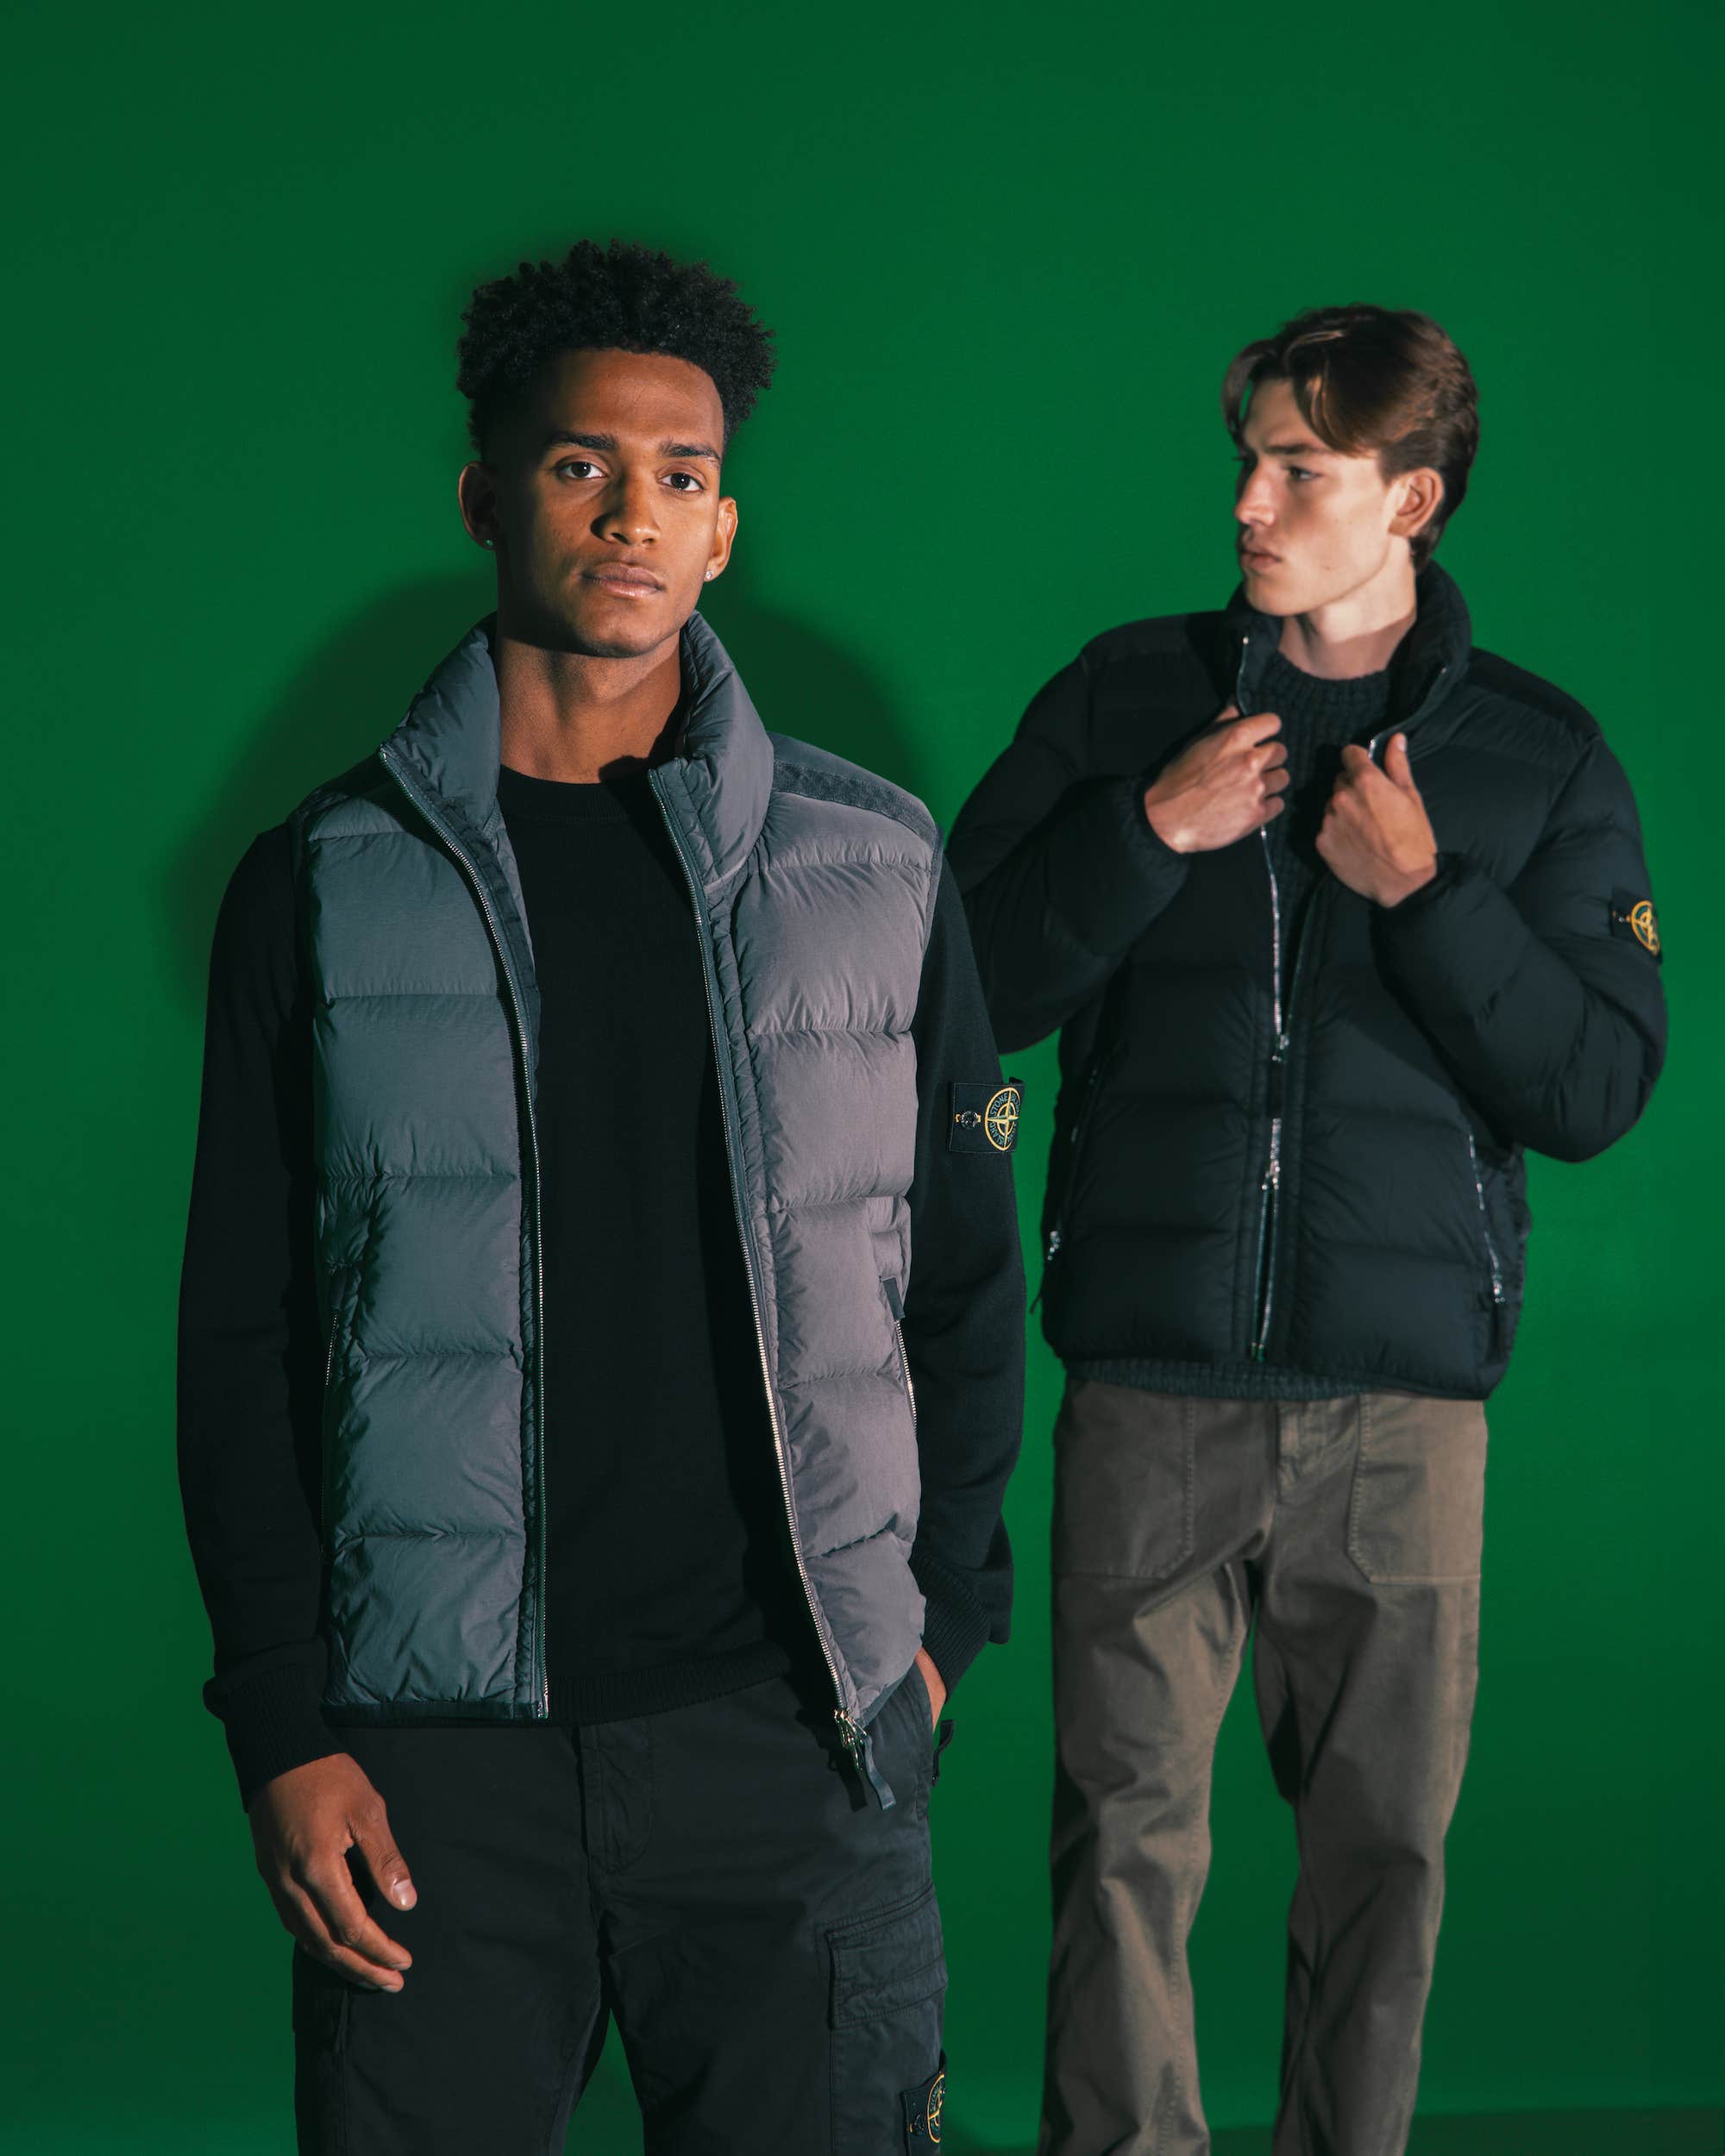 Stone Island Shows Resilience in Global Market Contraction